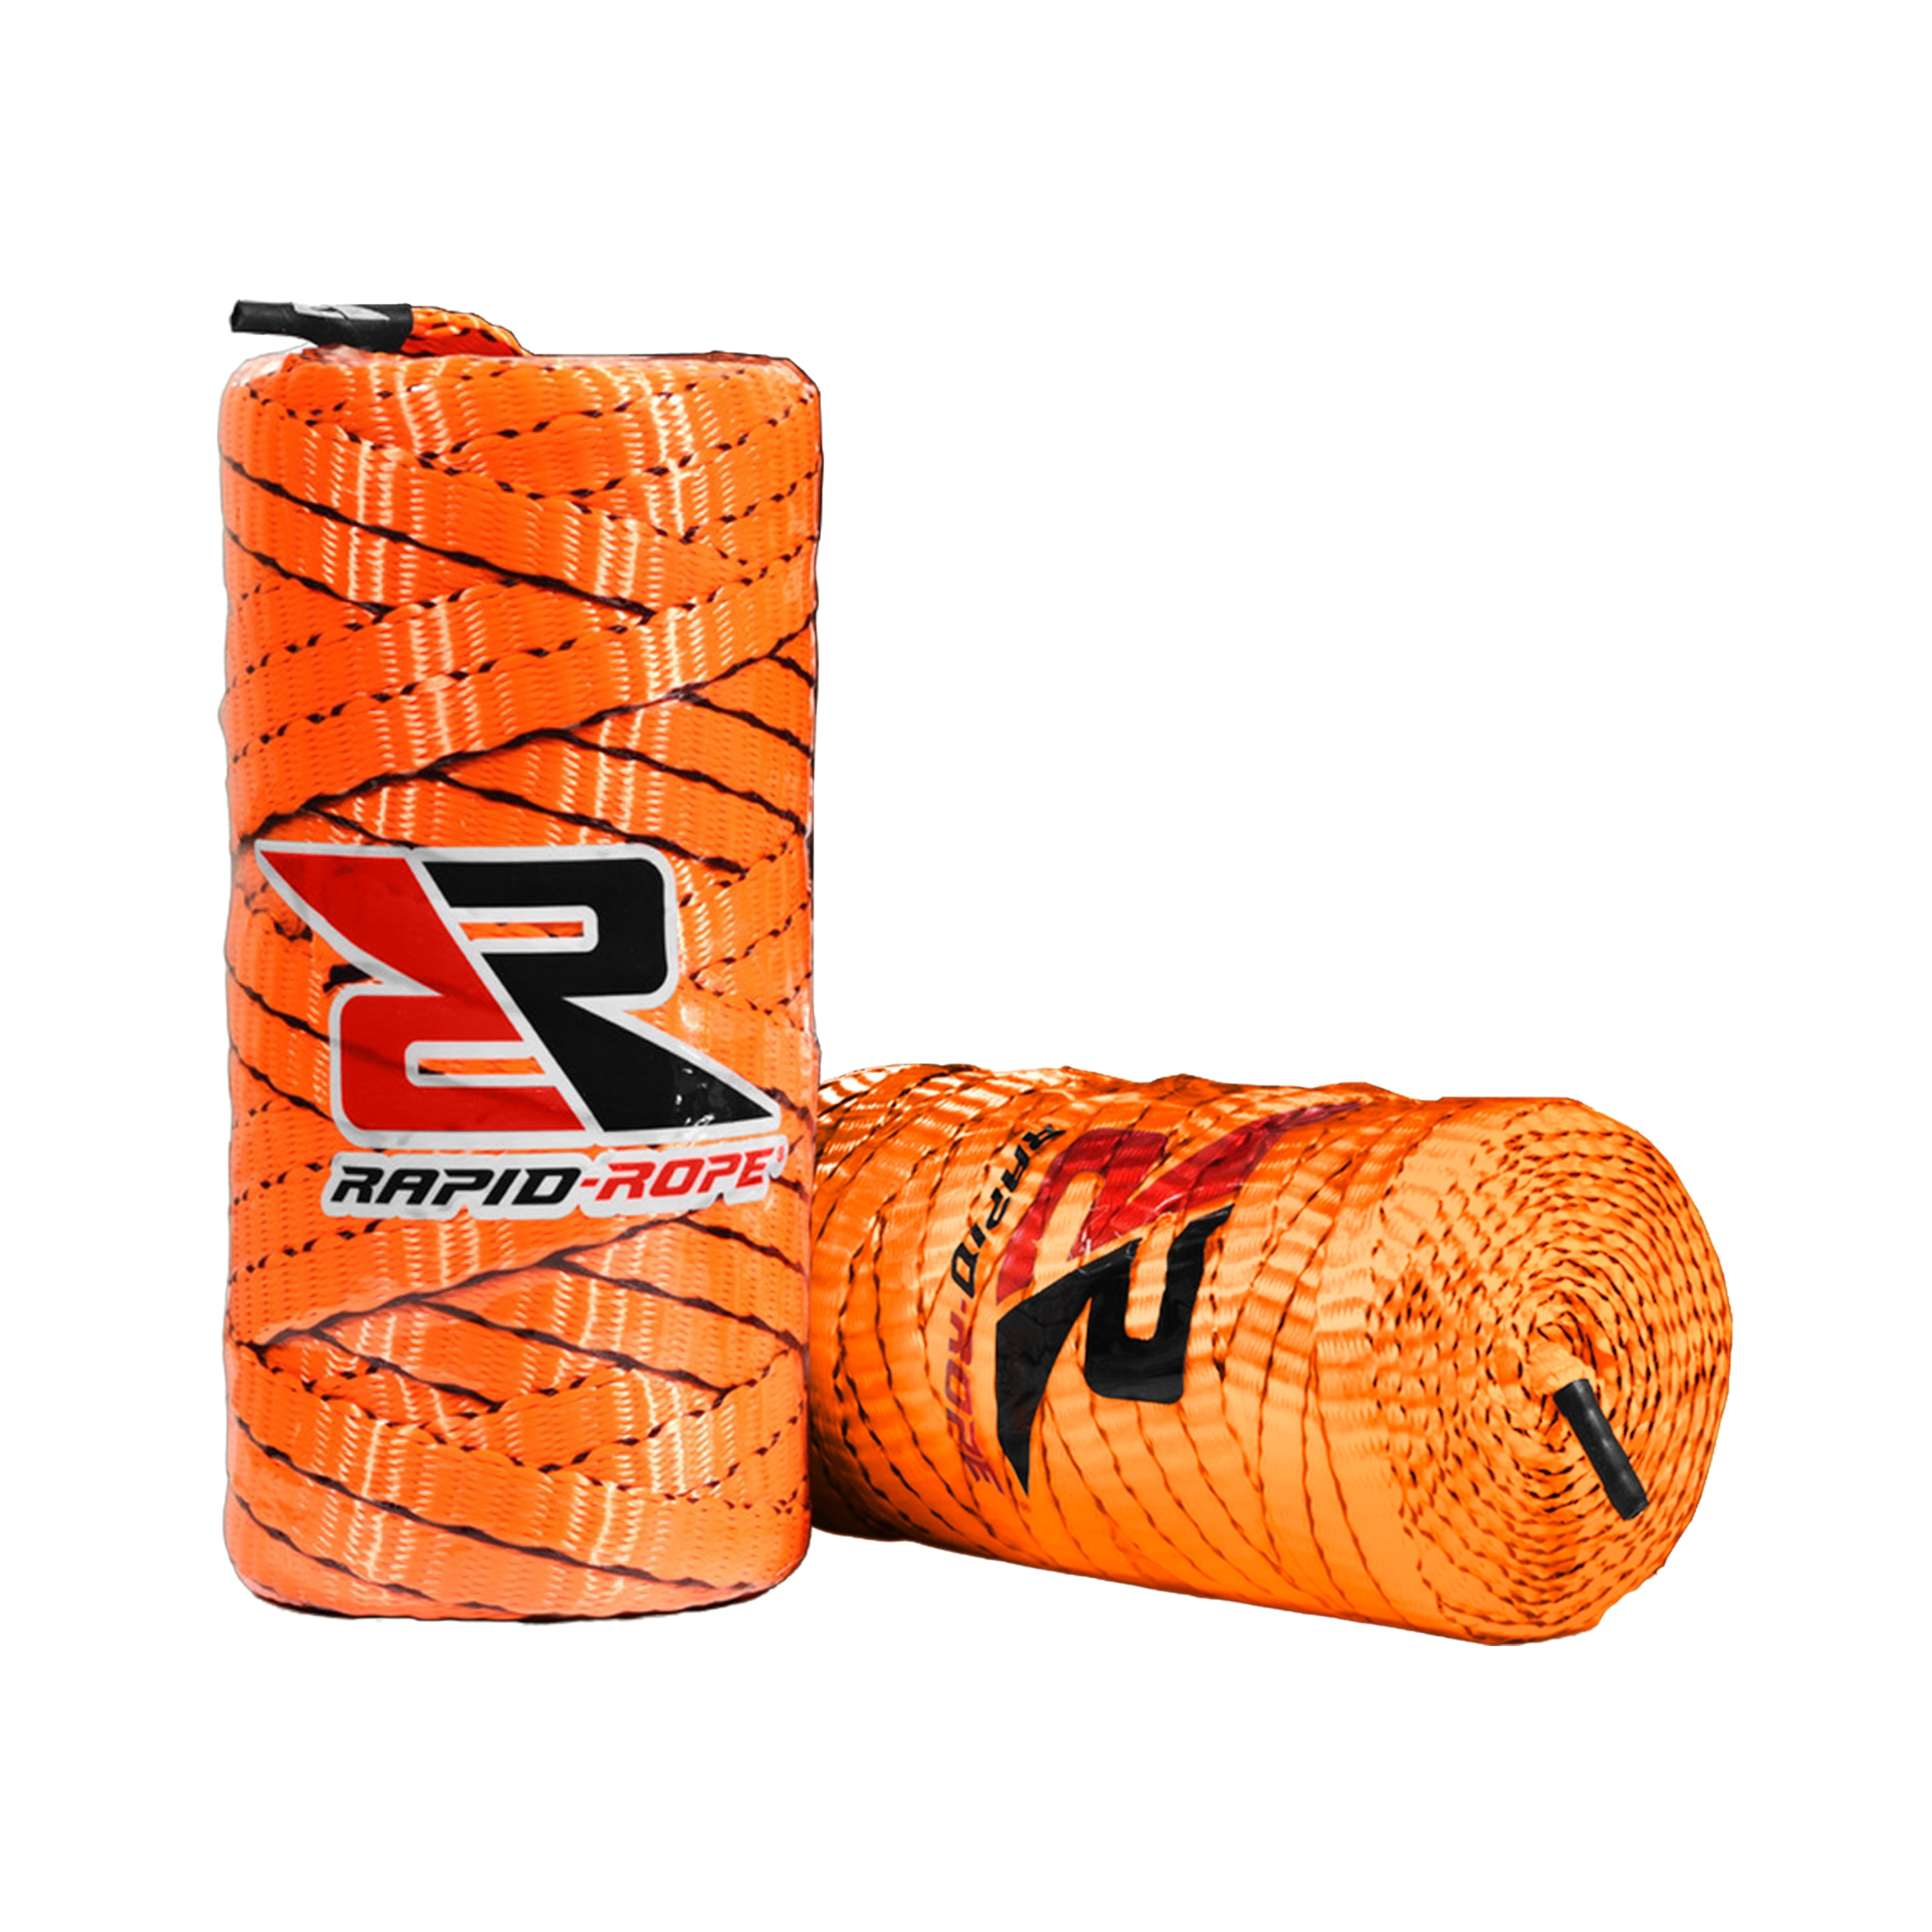 Rapid Rope Refill for Canister, Multipurpose Paracord Alternative